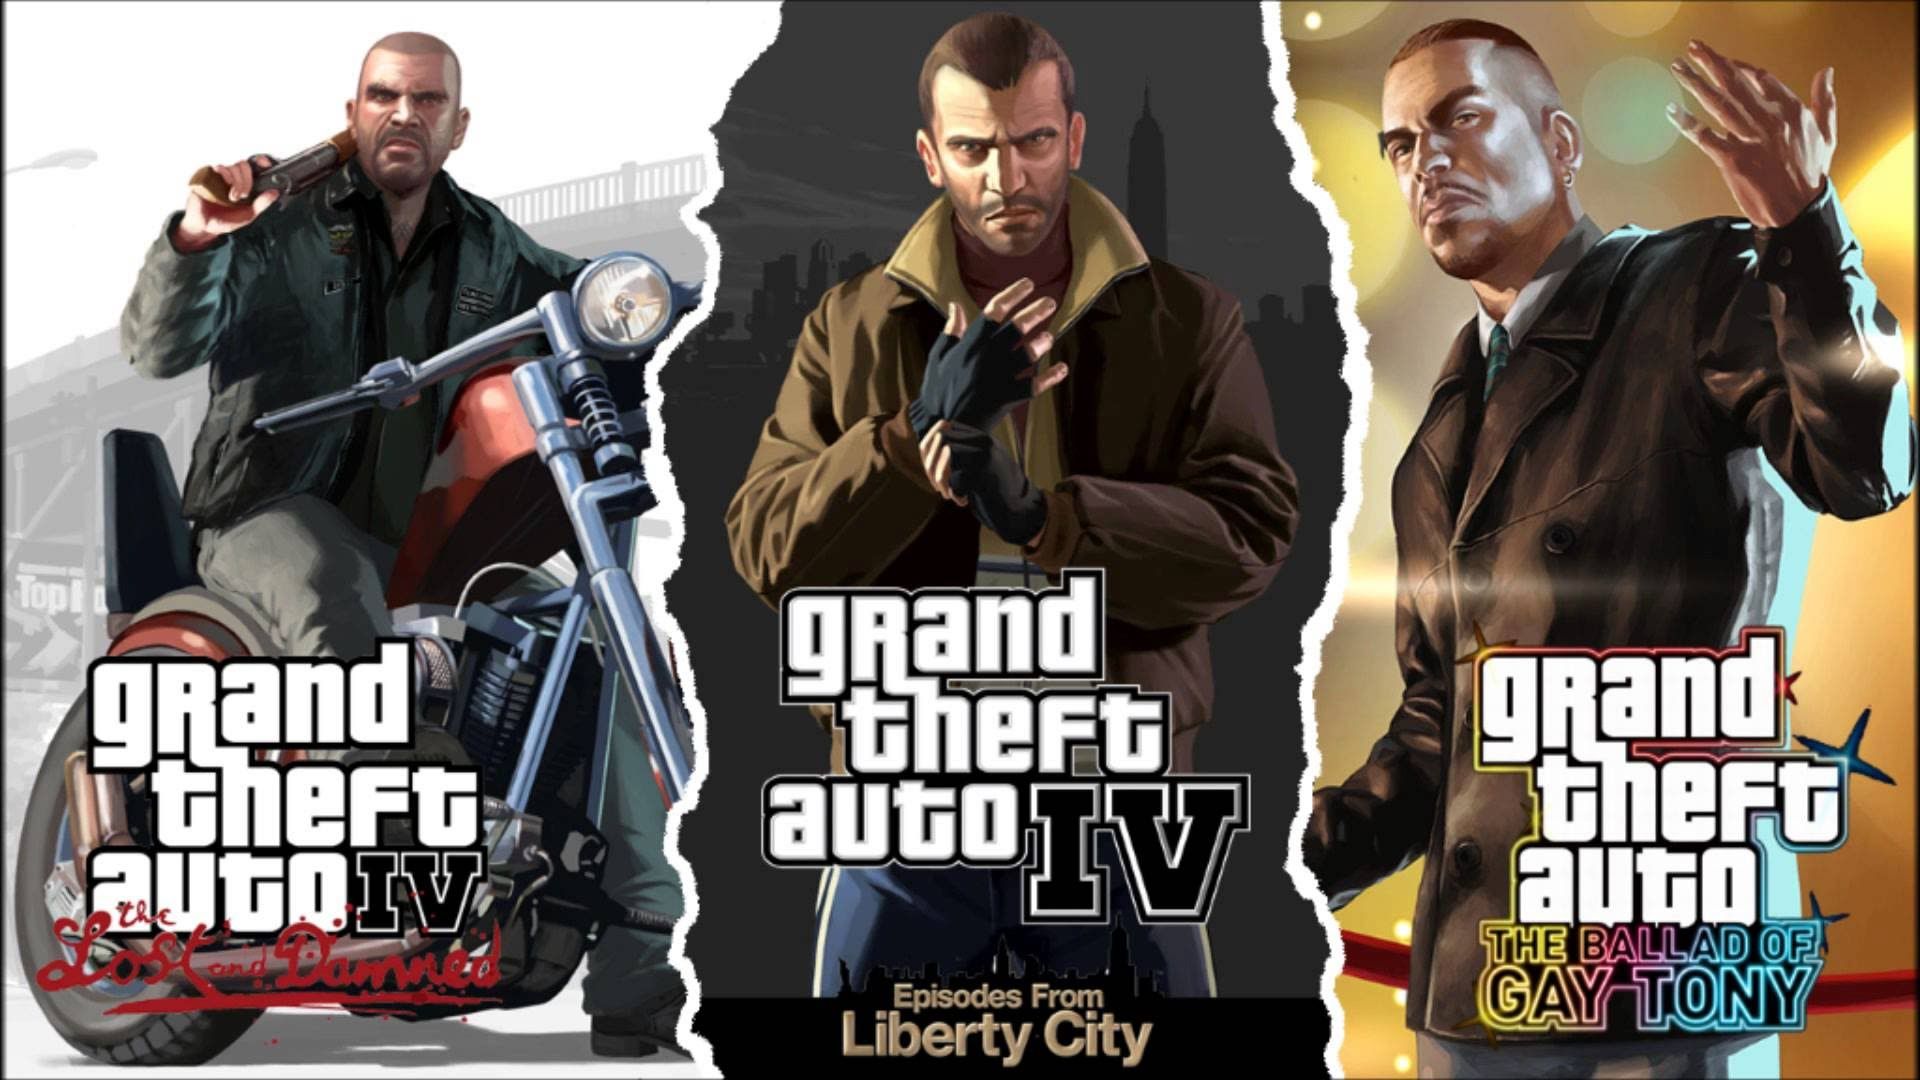 Grand Theft Auto IV Wallpapers - Wallpaper Cave